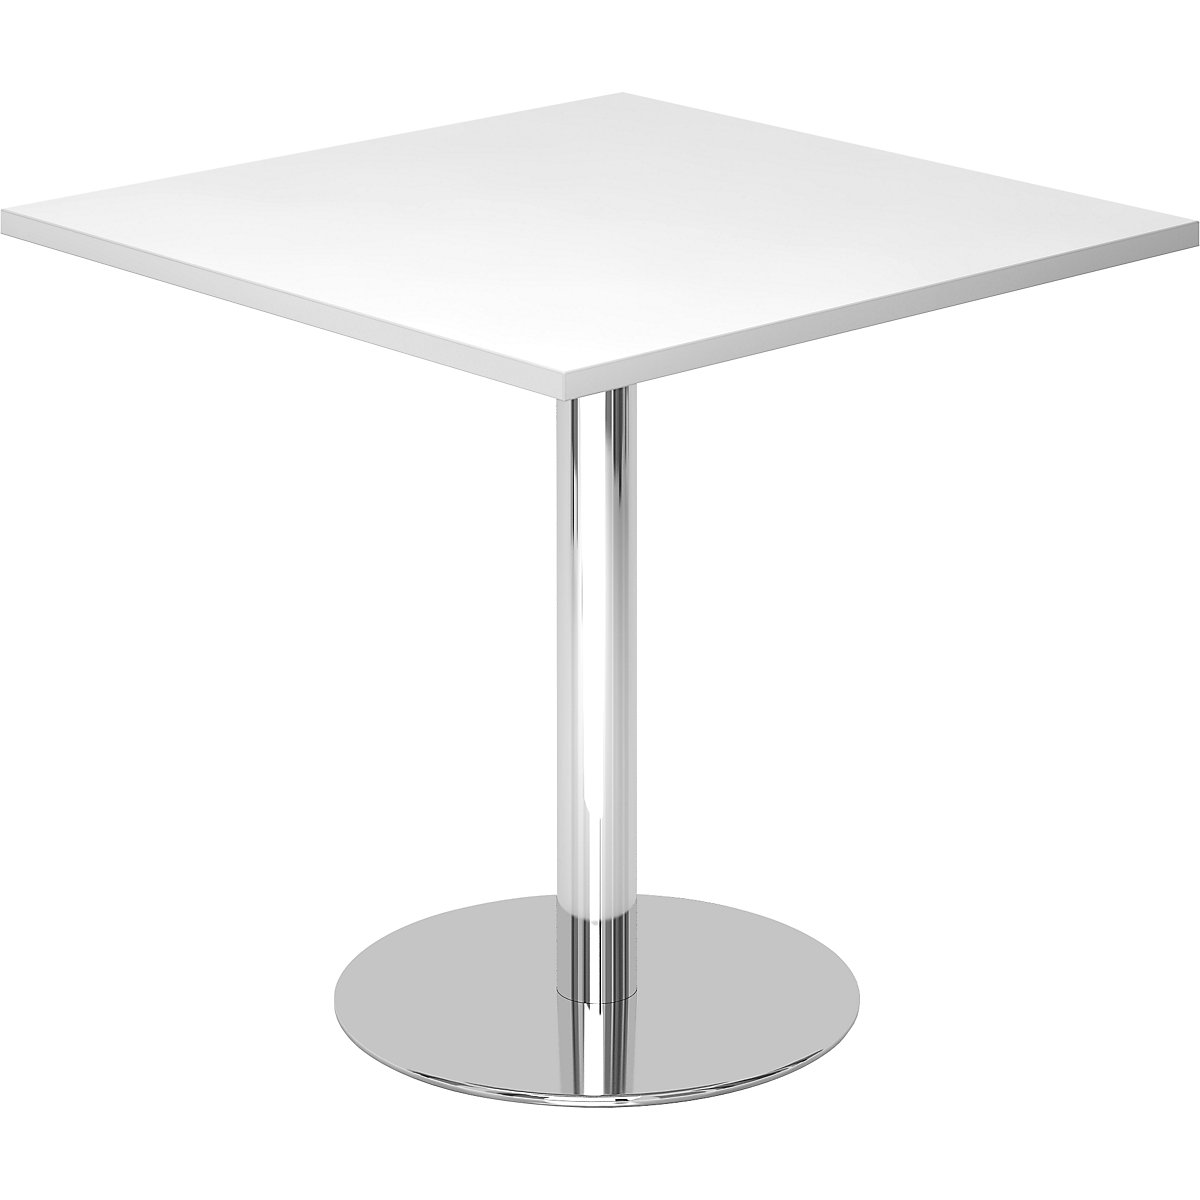 Conference table, LxW 800 x 800 mm, 755 mm high, chrome plated frame, tabletop in white-4